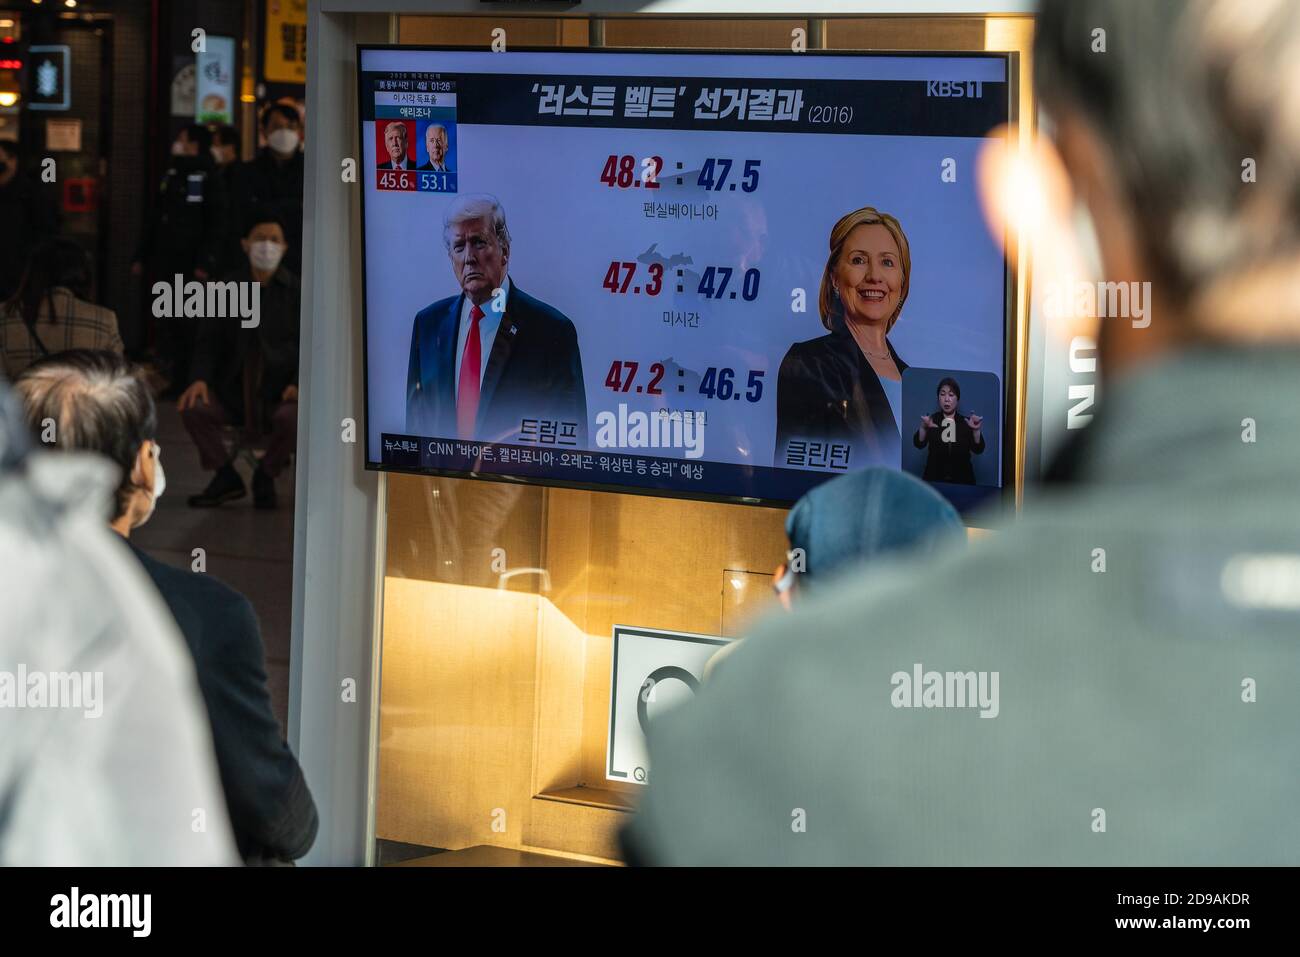 People at Seoul Train Station watch news report about the US presidential election comparing Hillary Clinton with Donald Trump on 2020 US presidential election day.. Stock Photo